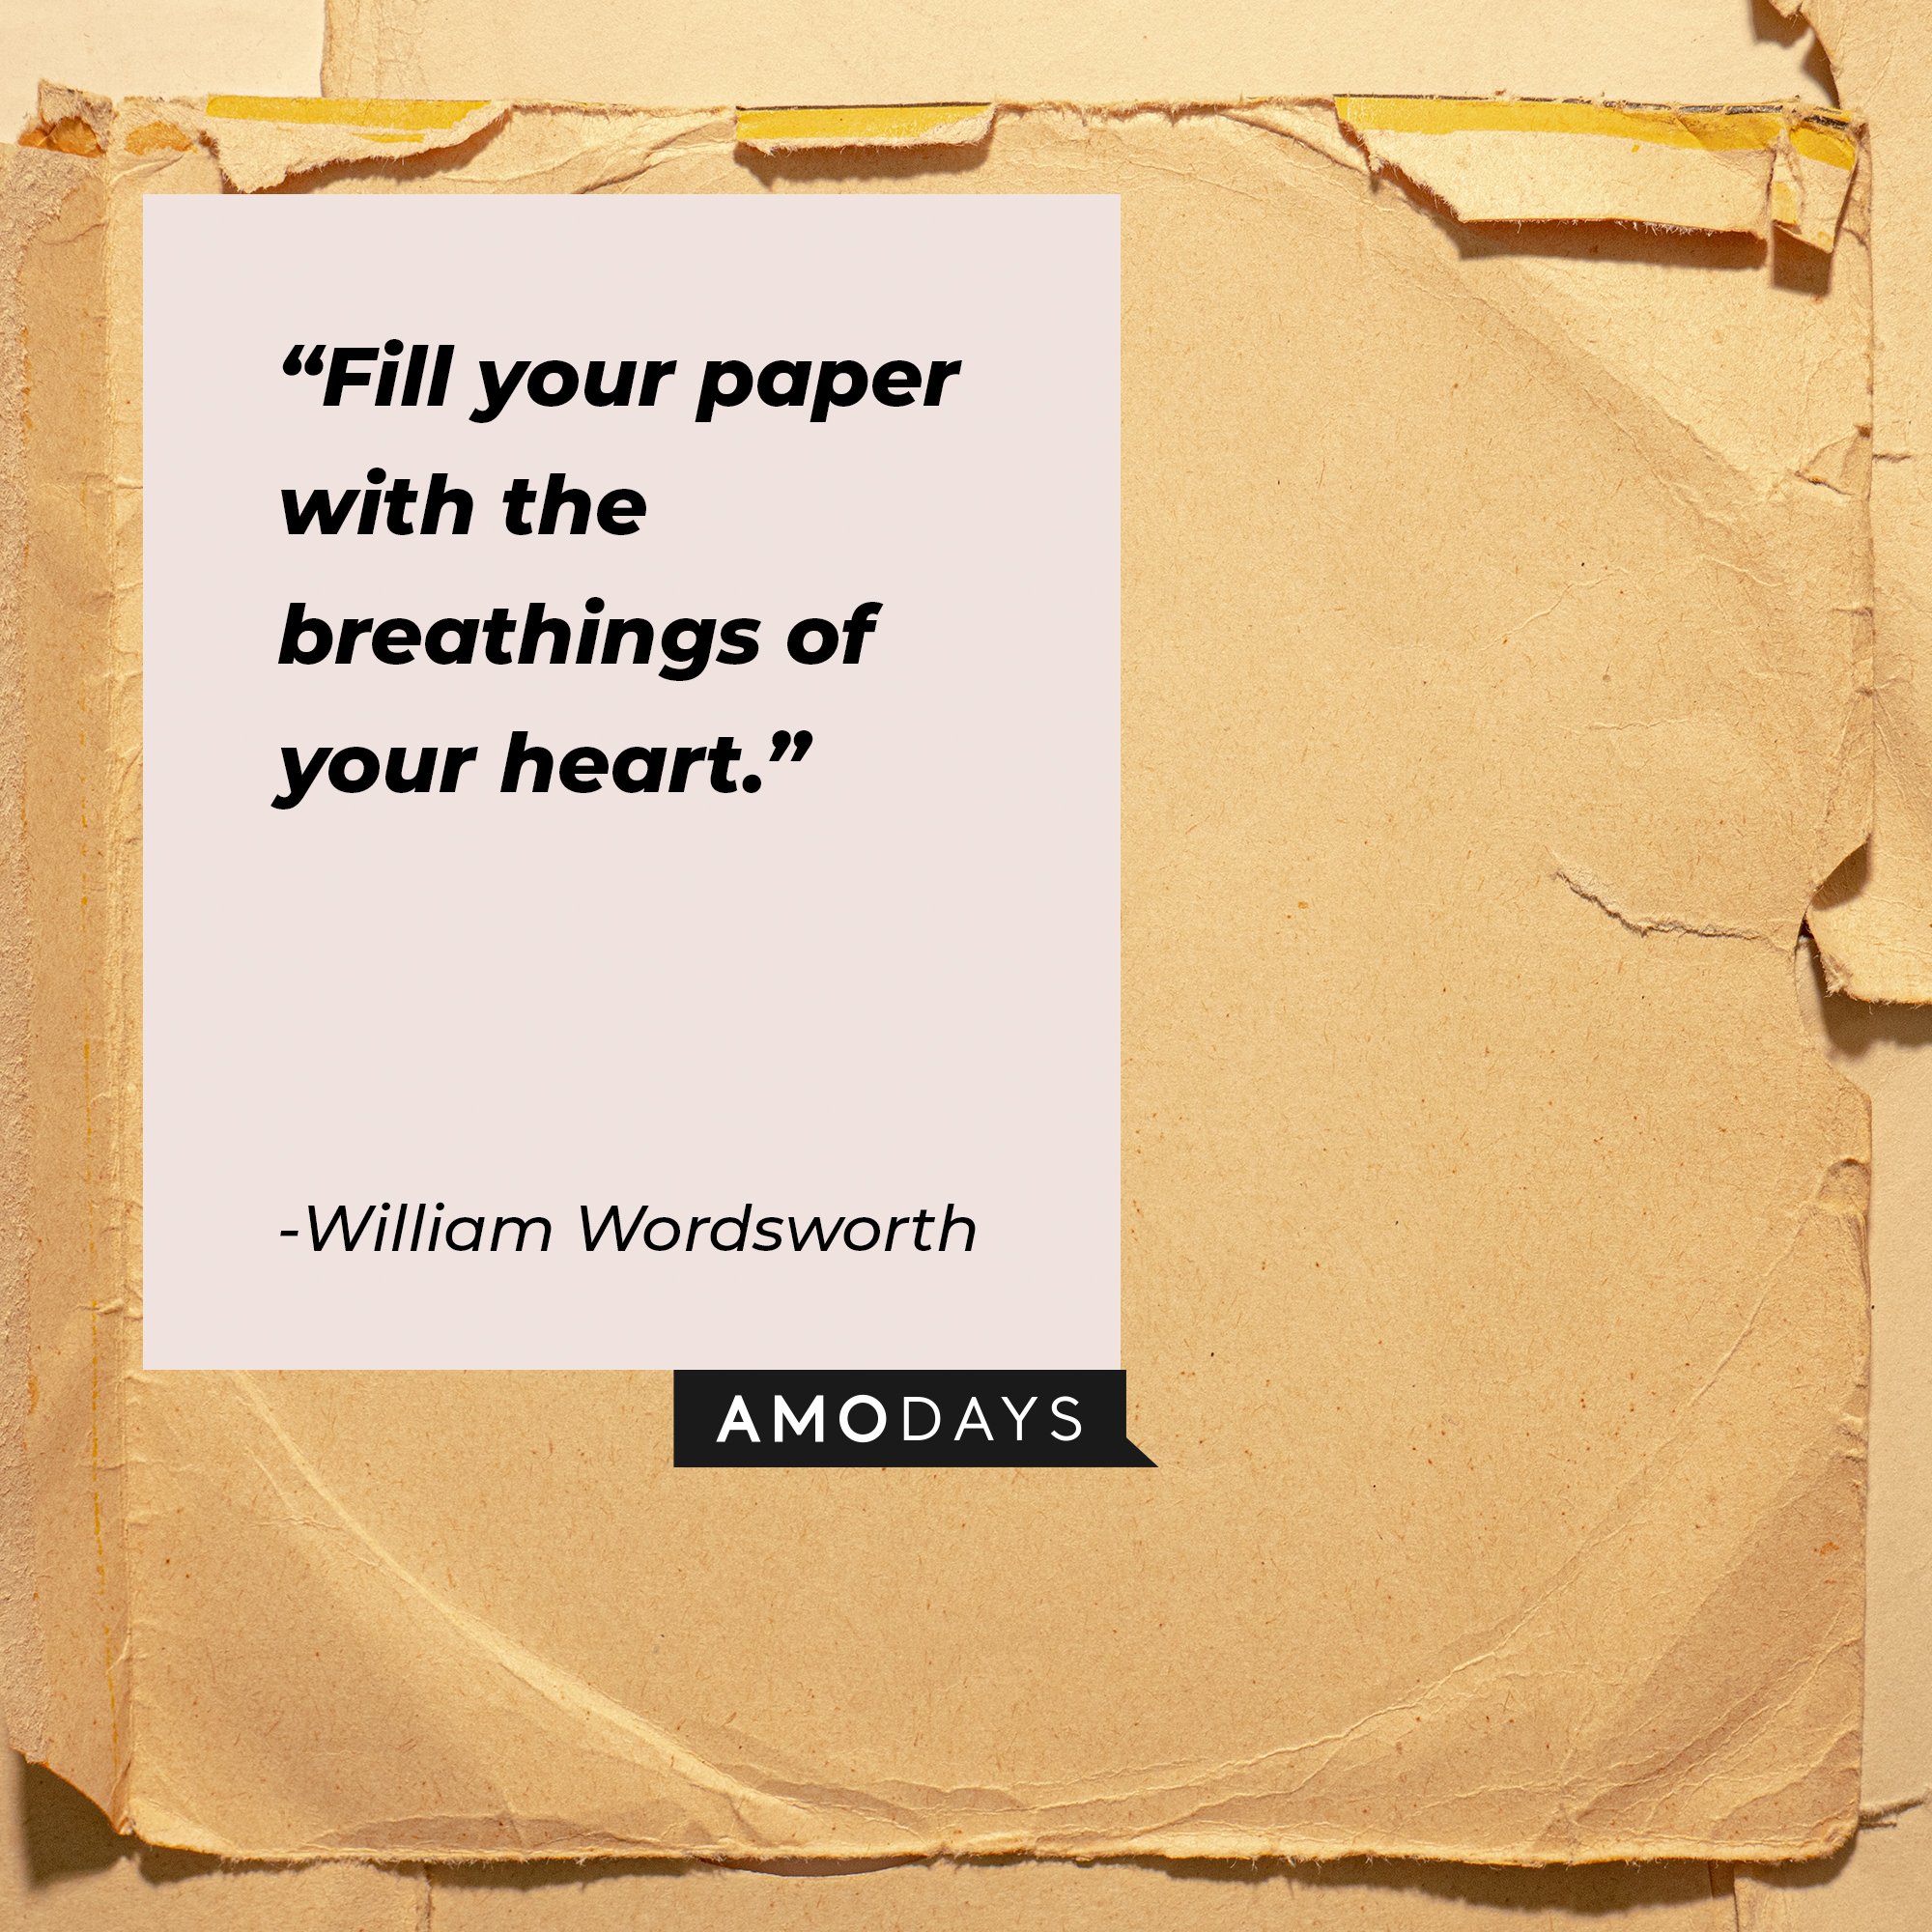 William Wordsworth’s quote: "Fill your paper with the breathings of your heart." |  Image: AmoDays